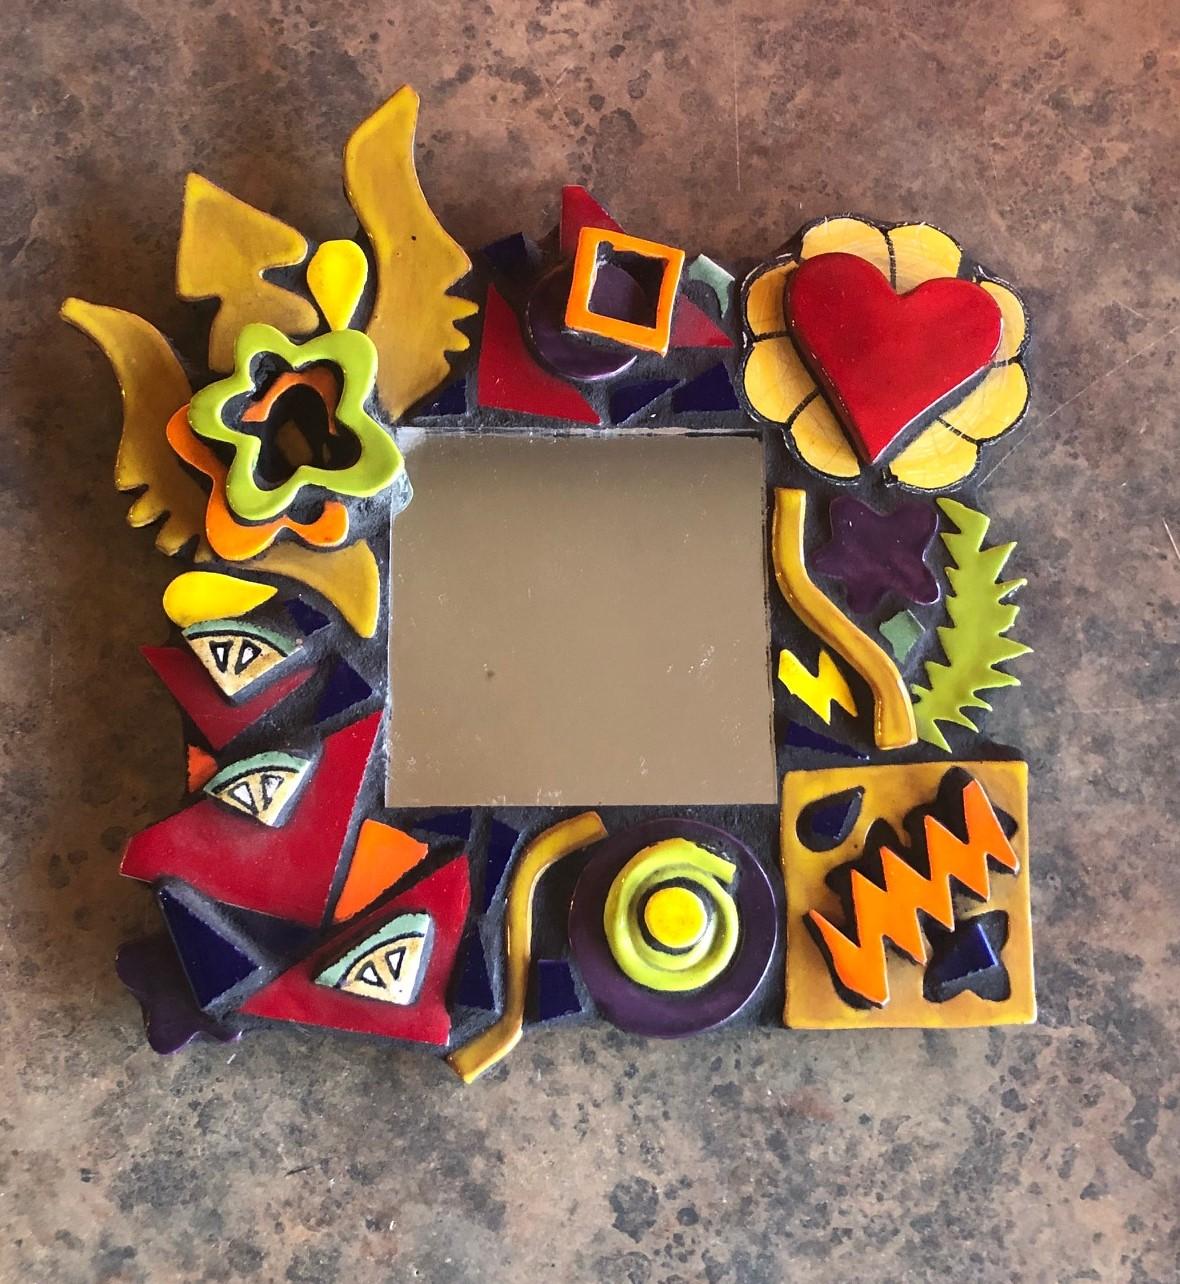 Very cool Memphis style small wall mirror signed Hill Brin, circa 1990s. There is a lot of intricate pottery detail and image overlap on the frame of the handmade mirror.